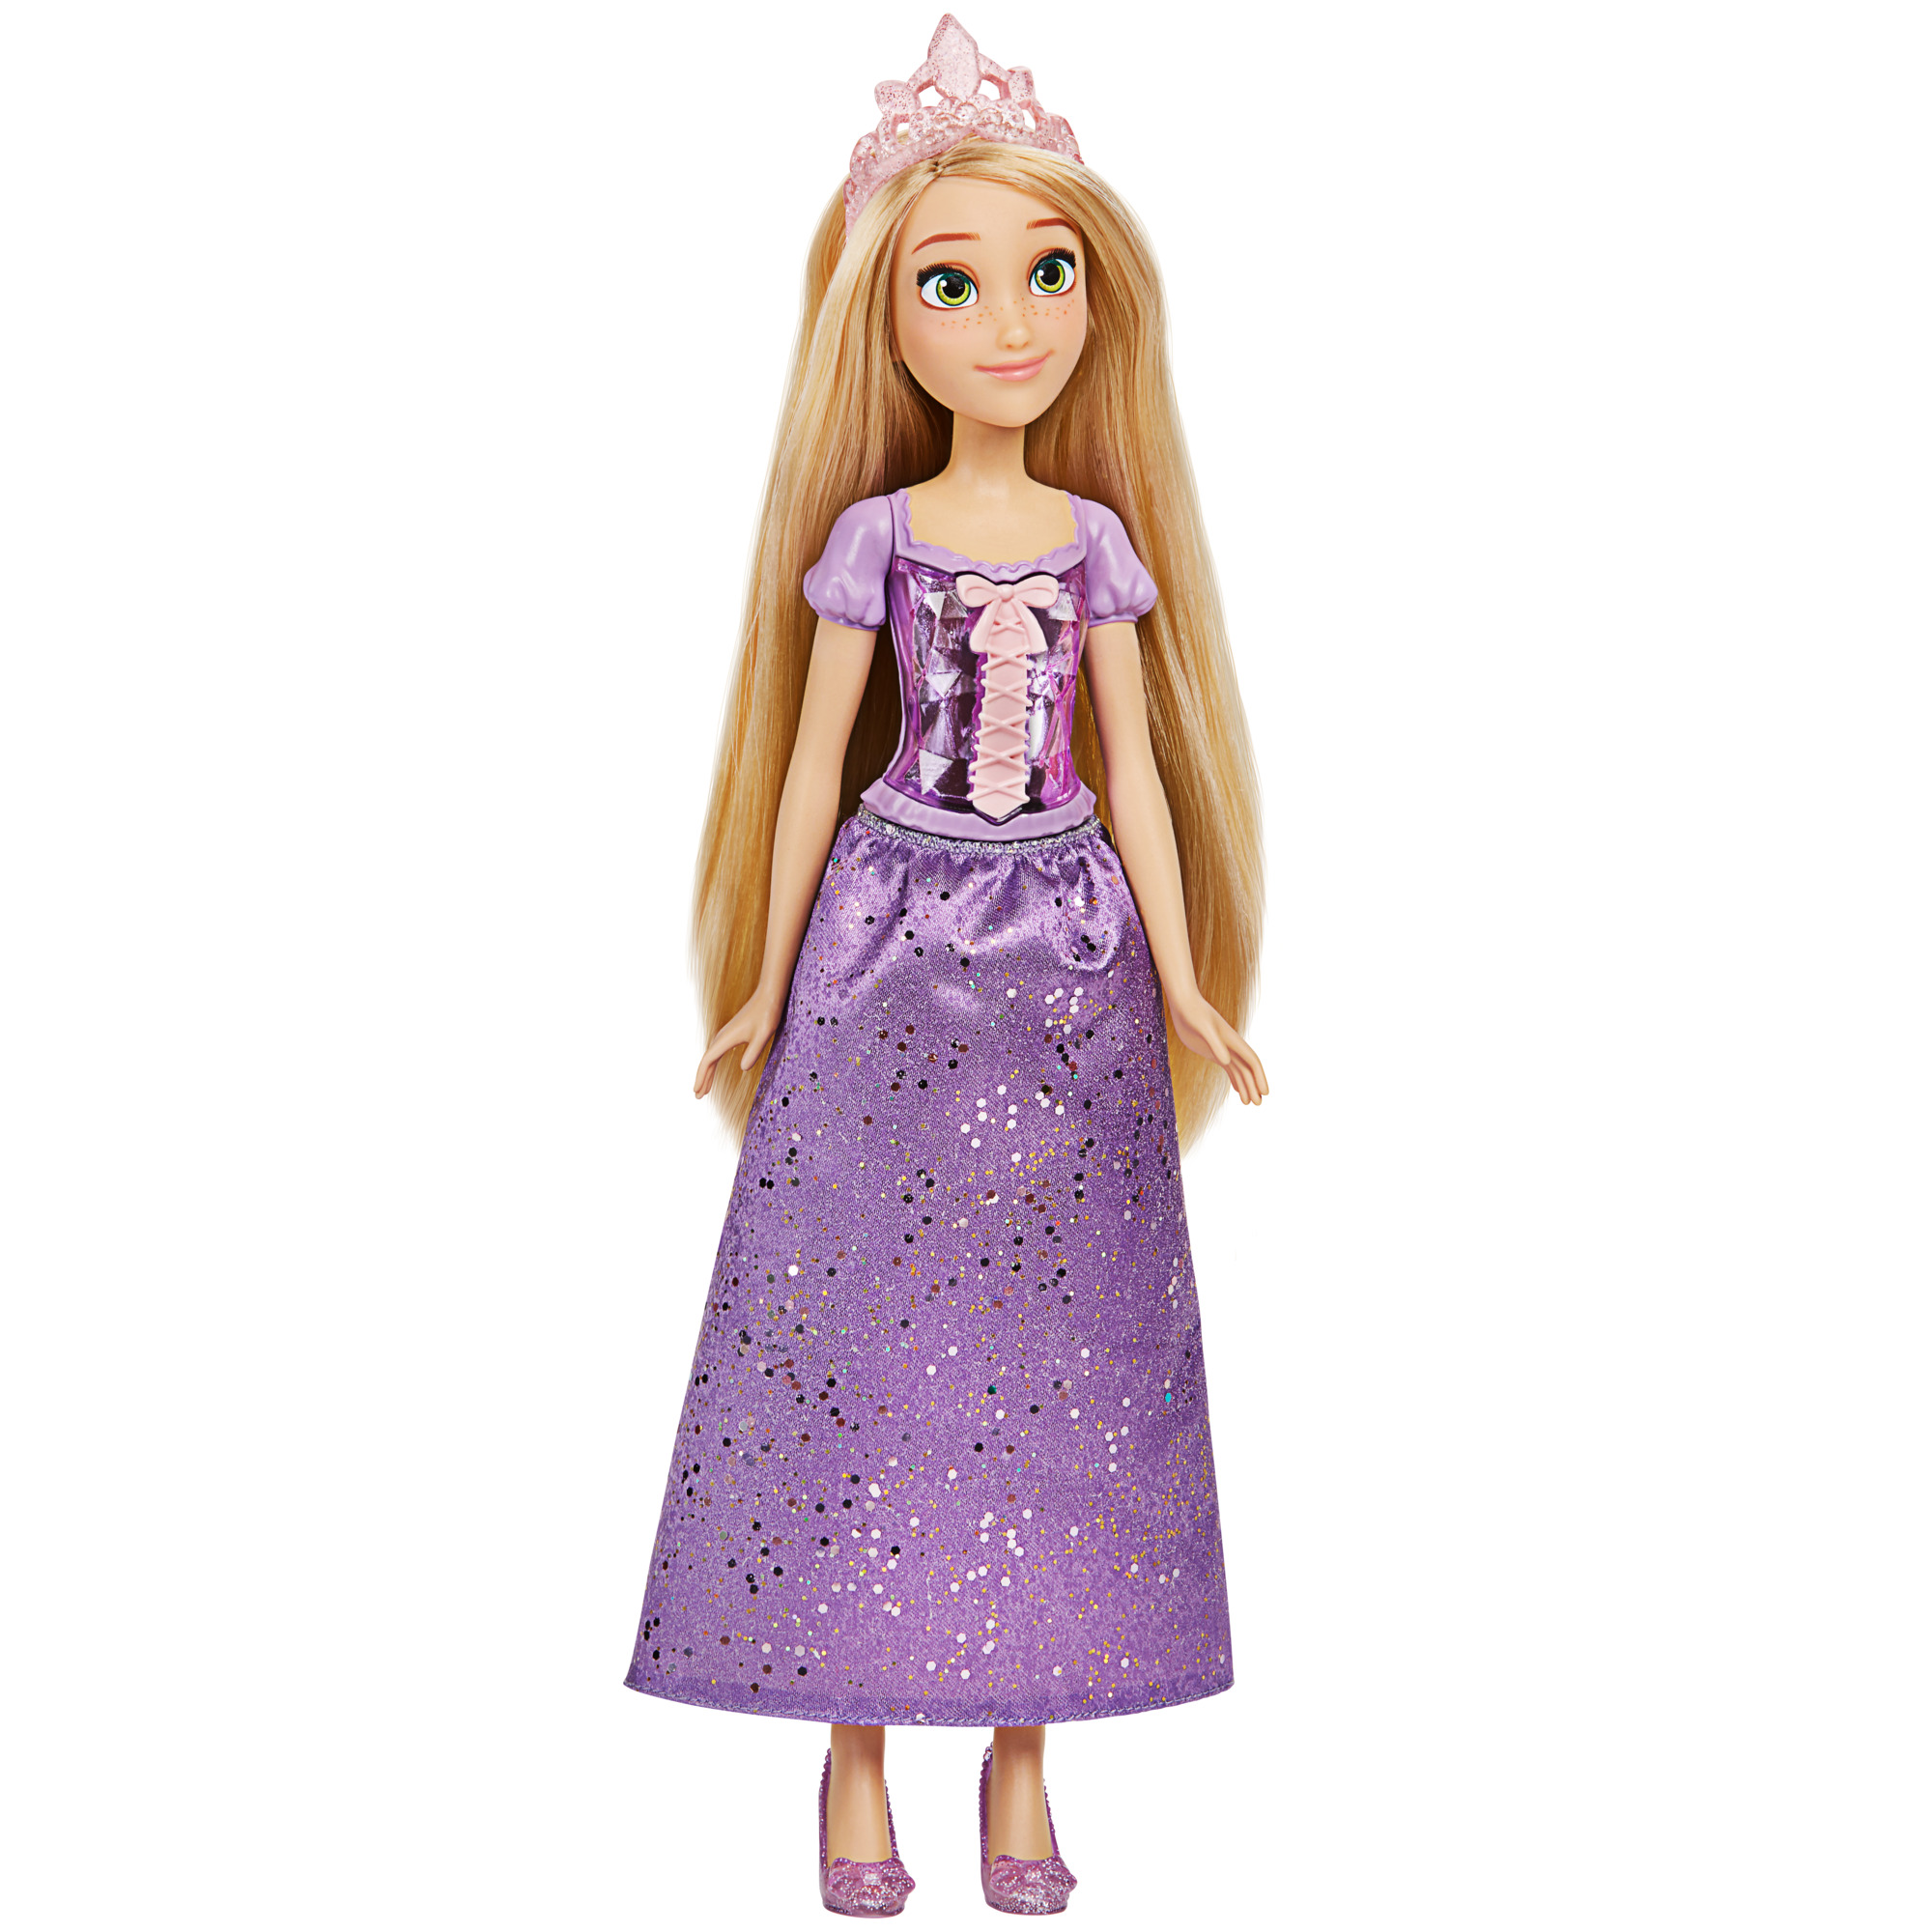 Disney Princess Royal Shimmer Rapunzel Doll, with Skirt and Accessories - image 1 of 8